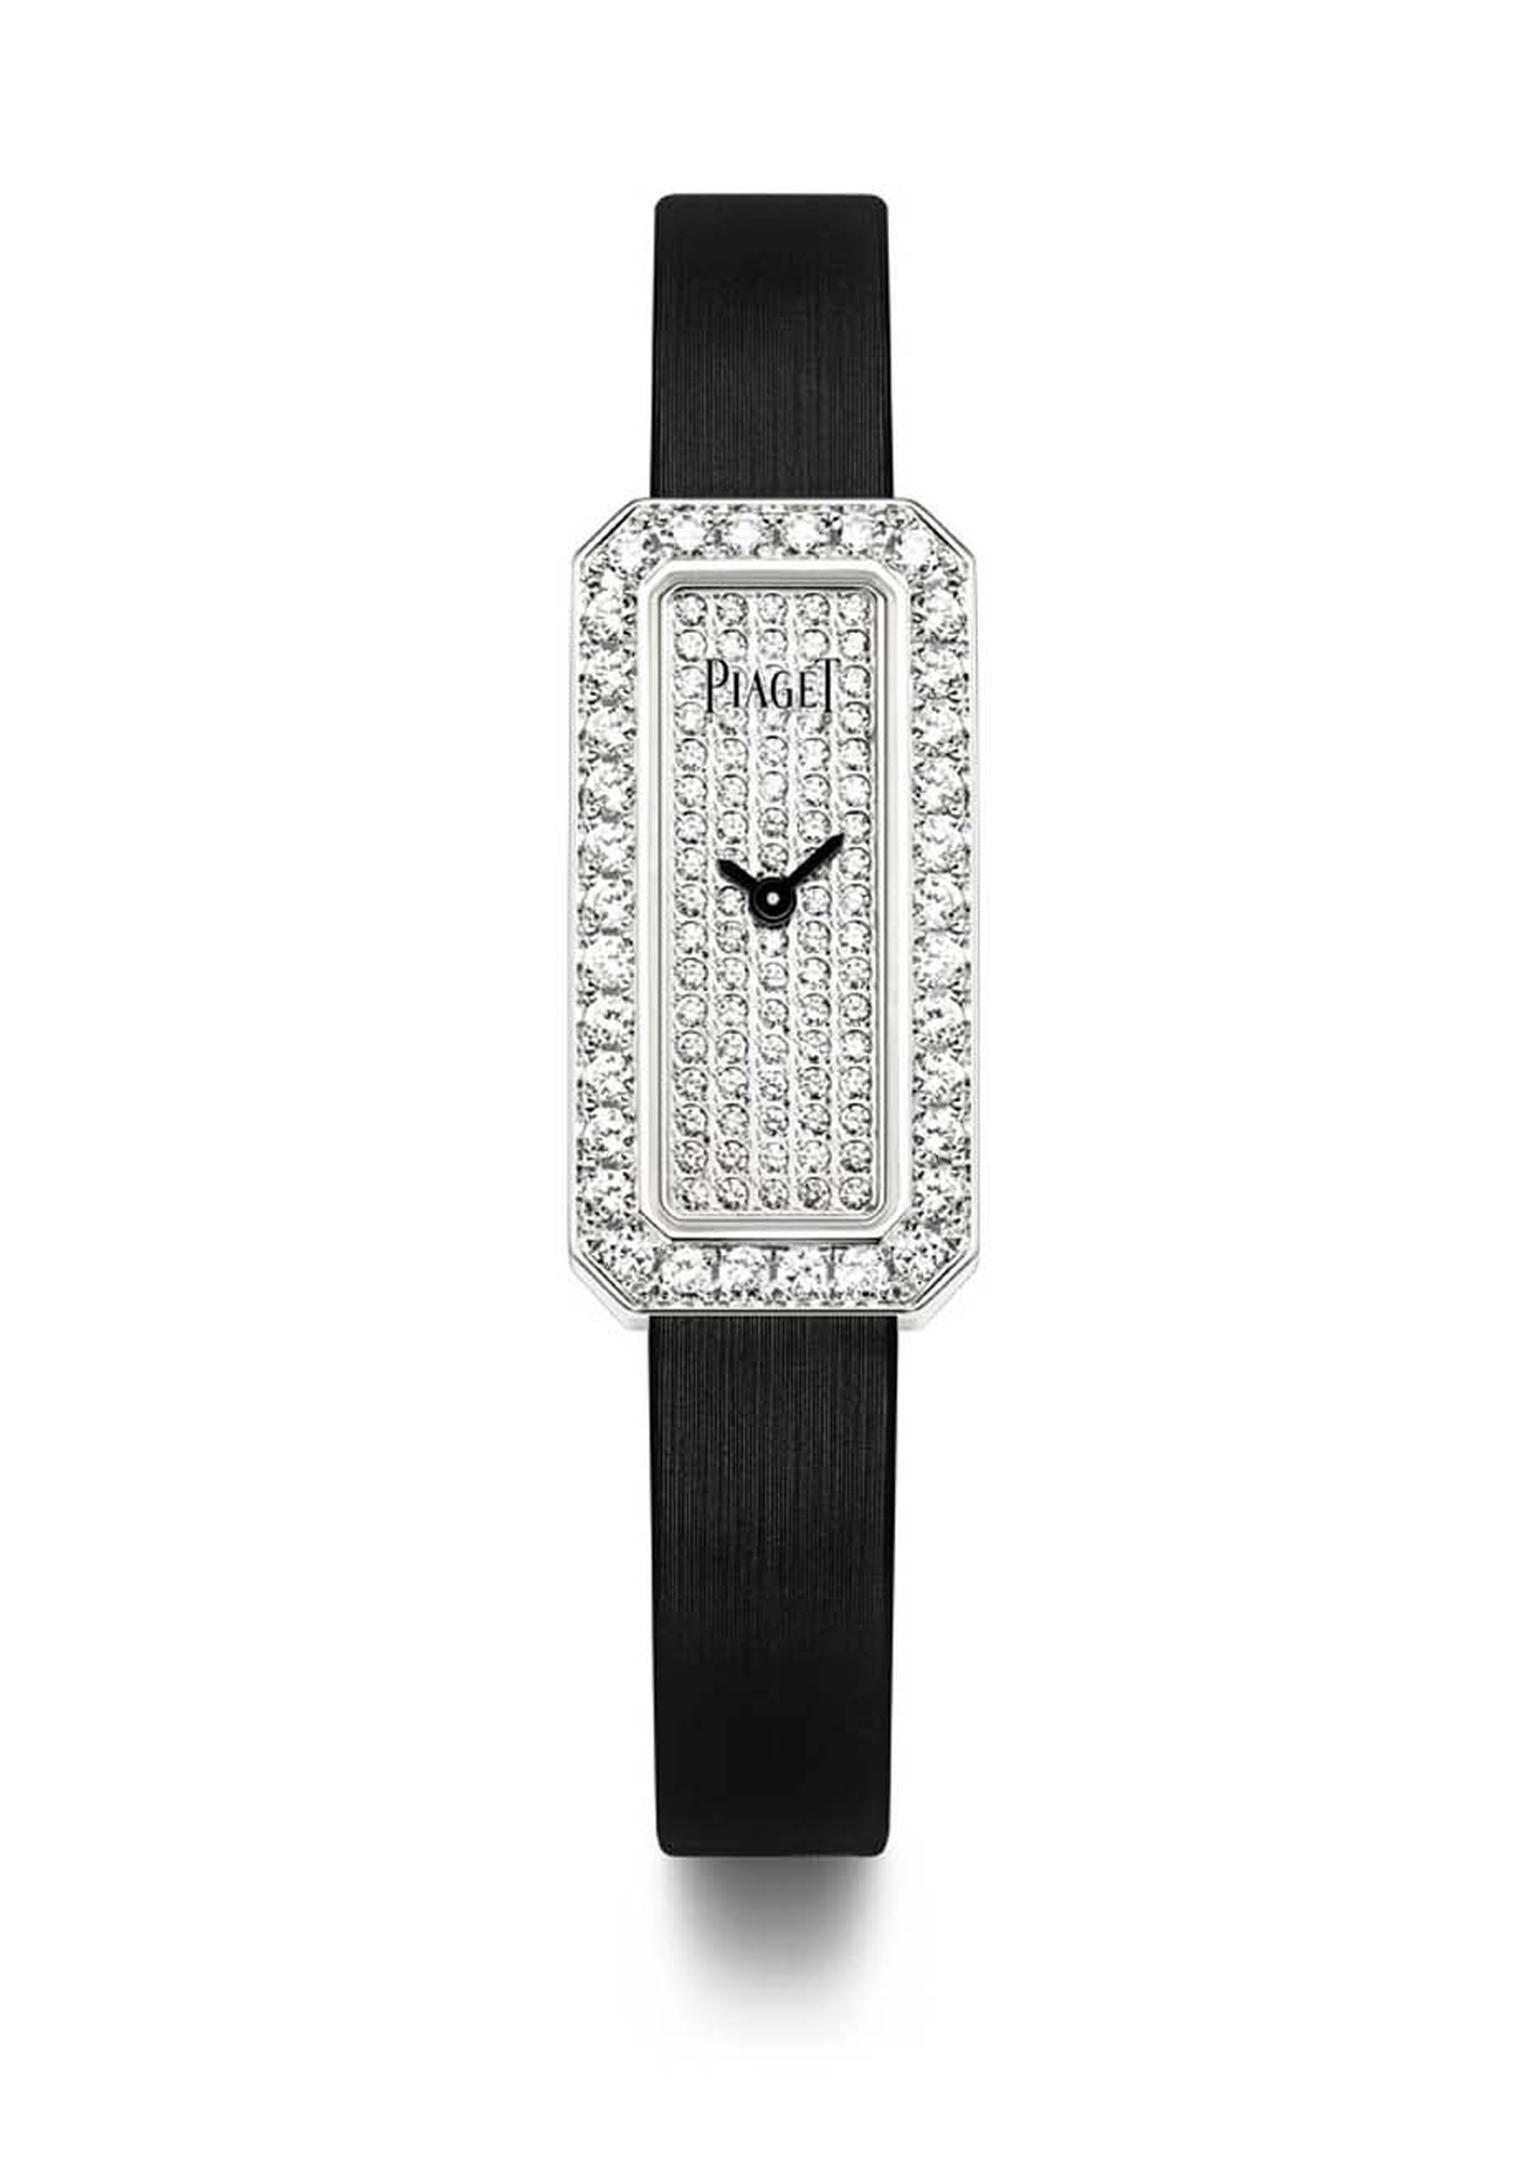 Piaget Limelight Diamonds watch in white gold with an emerald-cut shaped case, set with 1.10ct diamonds on the bezel and a further 0.50ct on the dial, presented on a black satin strap with an ardillon buckle set with a single diamond.